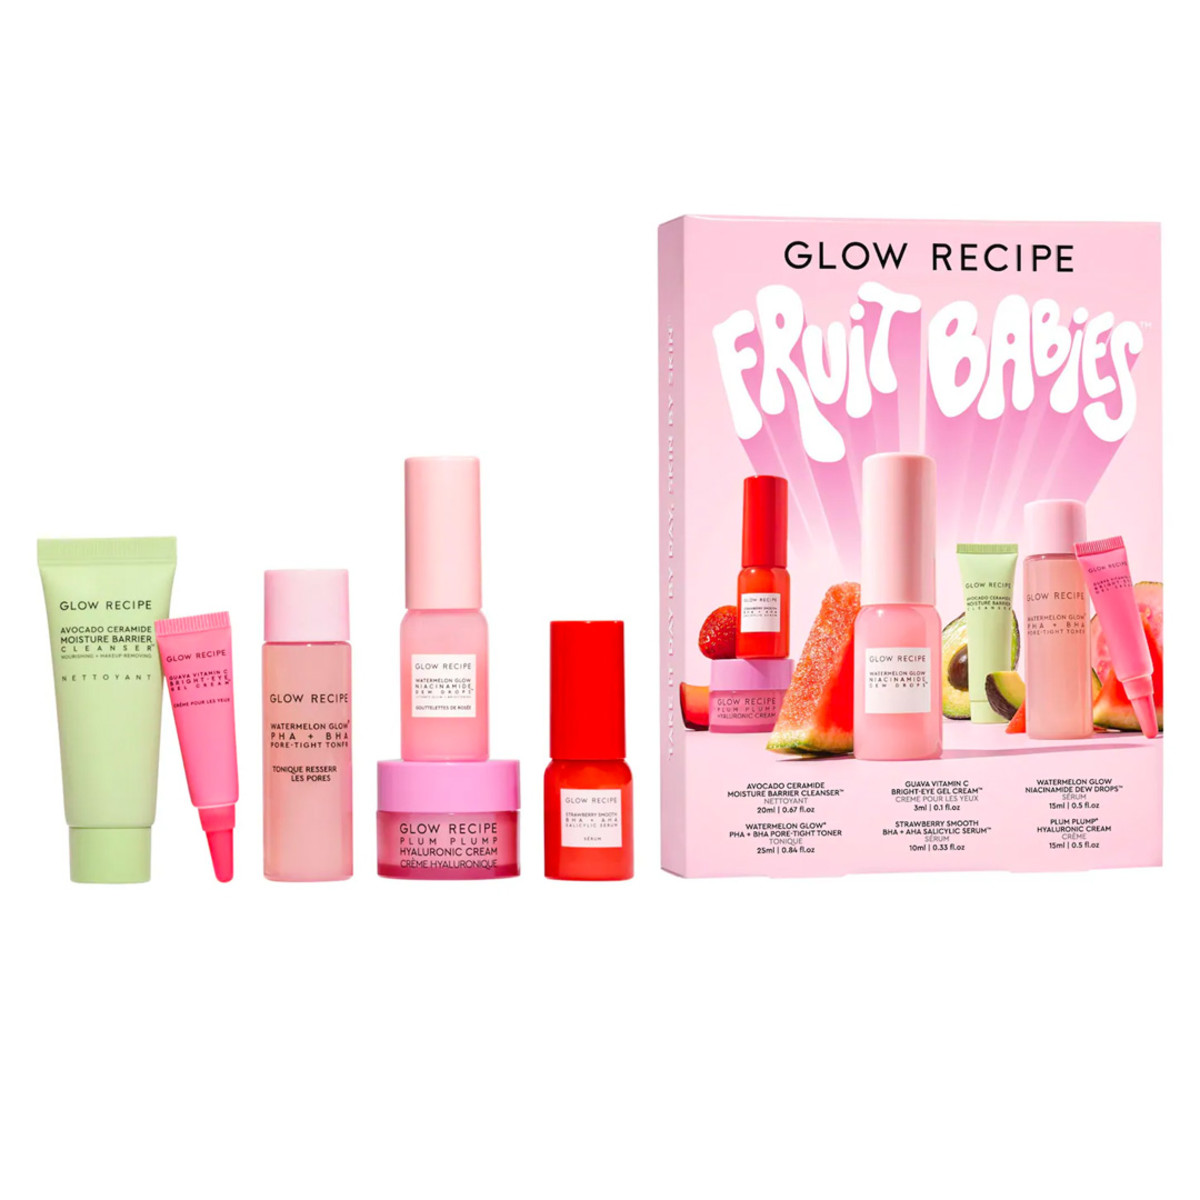 One of the best skincare gift sets for women who love all things beauty, the Glow Recipe Fruit Babies Bestsellers Kit available now at Sephora